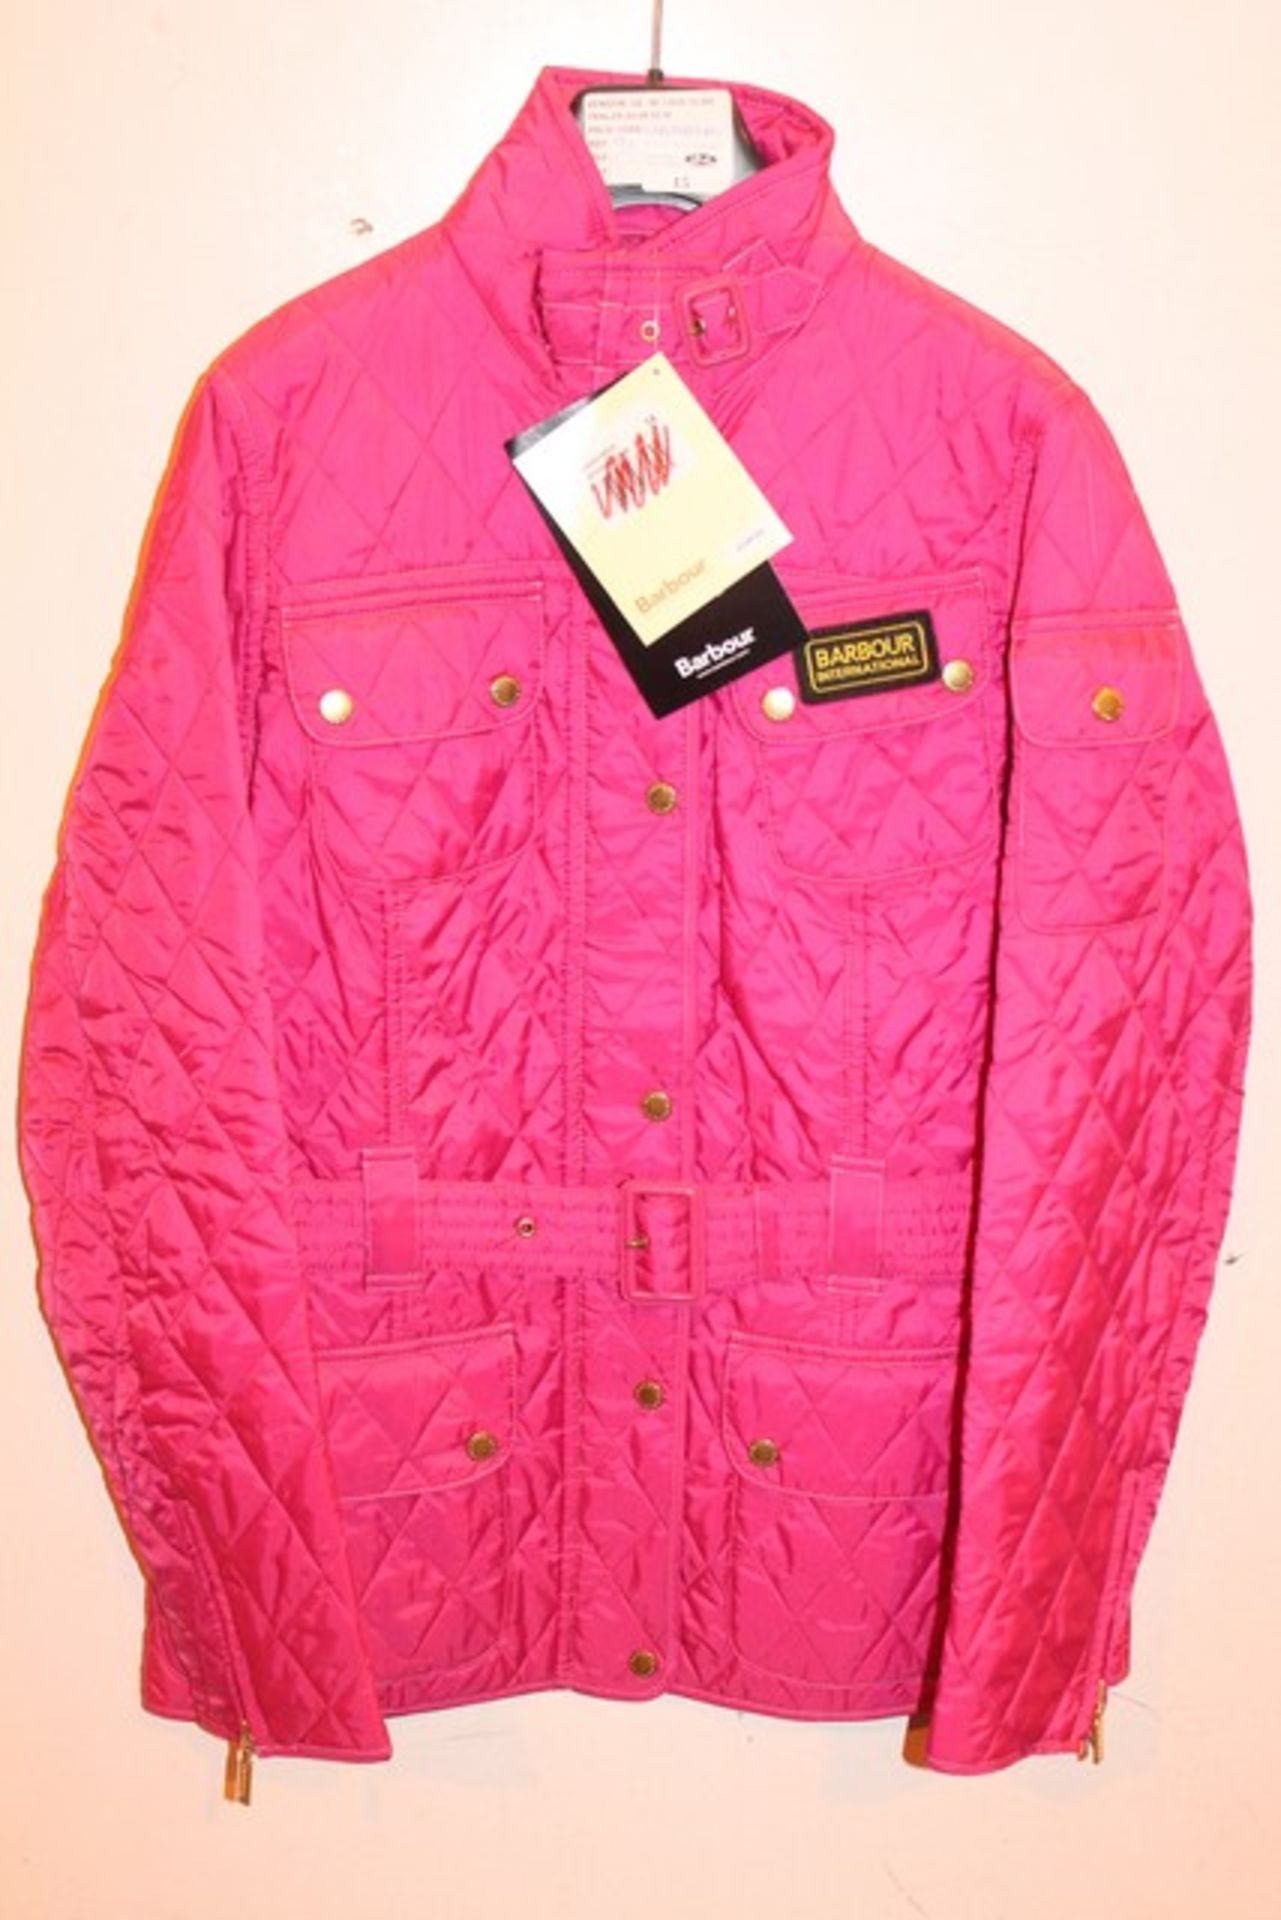 1 x SIZE 14 BARBOUR INTERNATIONAL QUILT LADIES JACKET RRP £150.  *PLEASE NOTE THAT THE BID PRICE